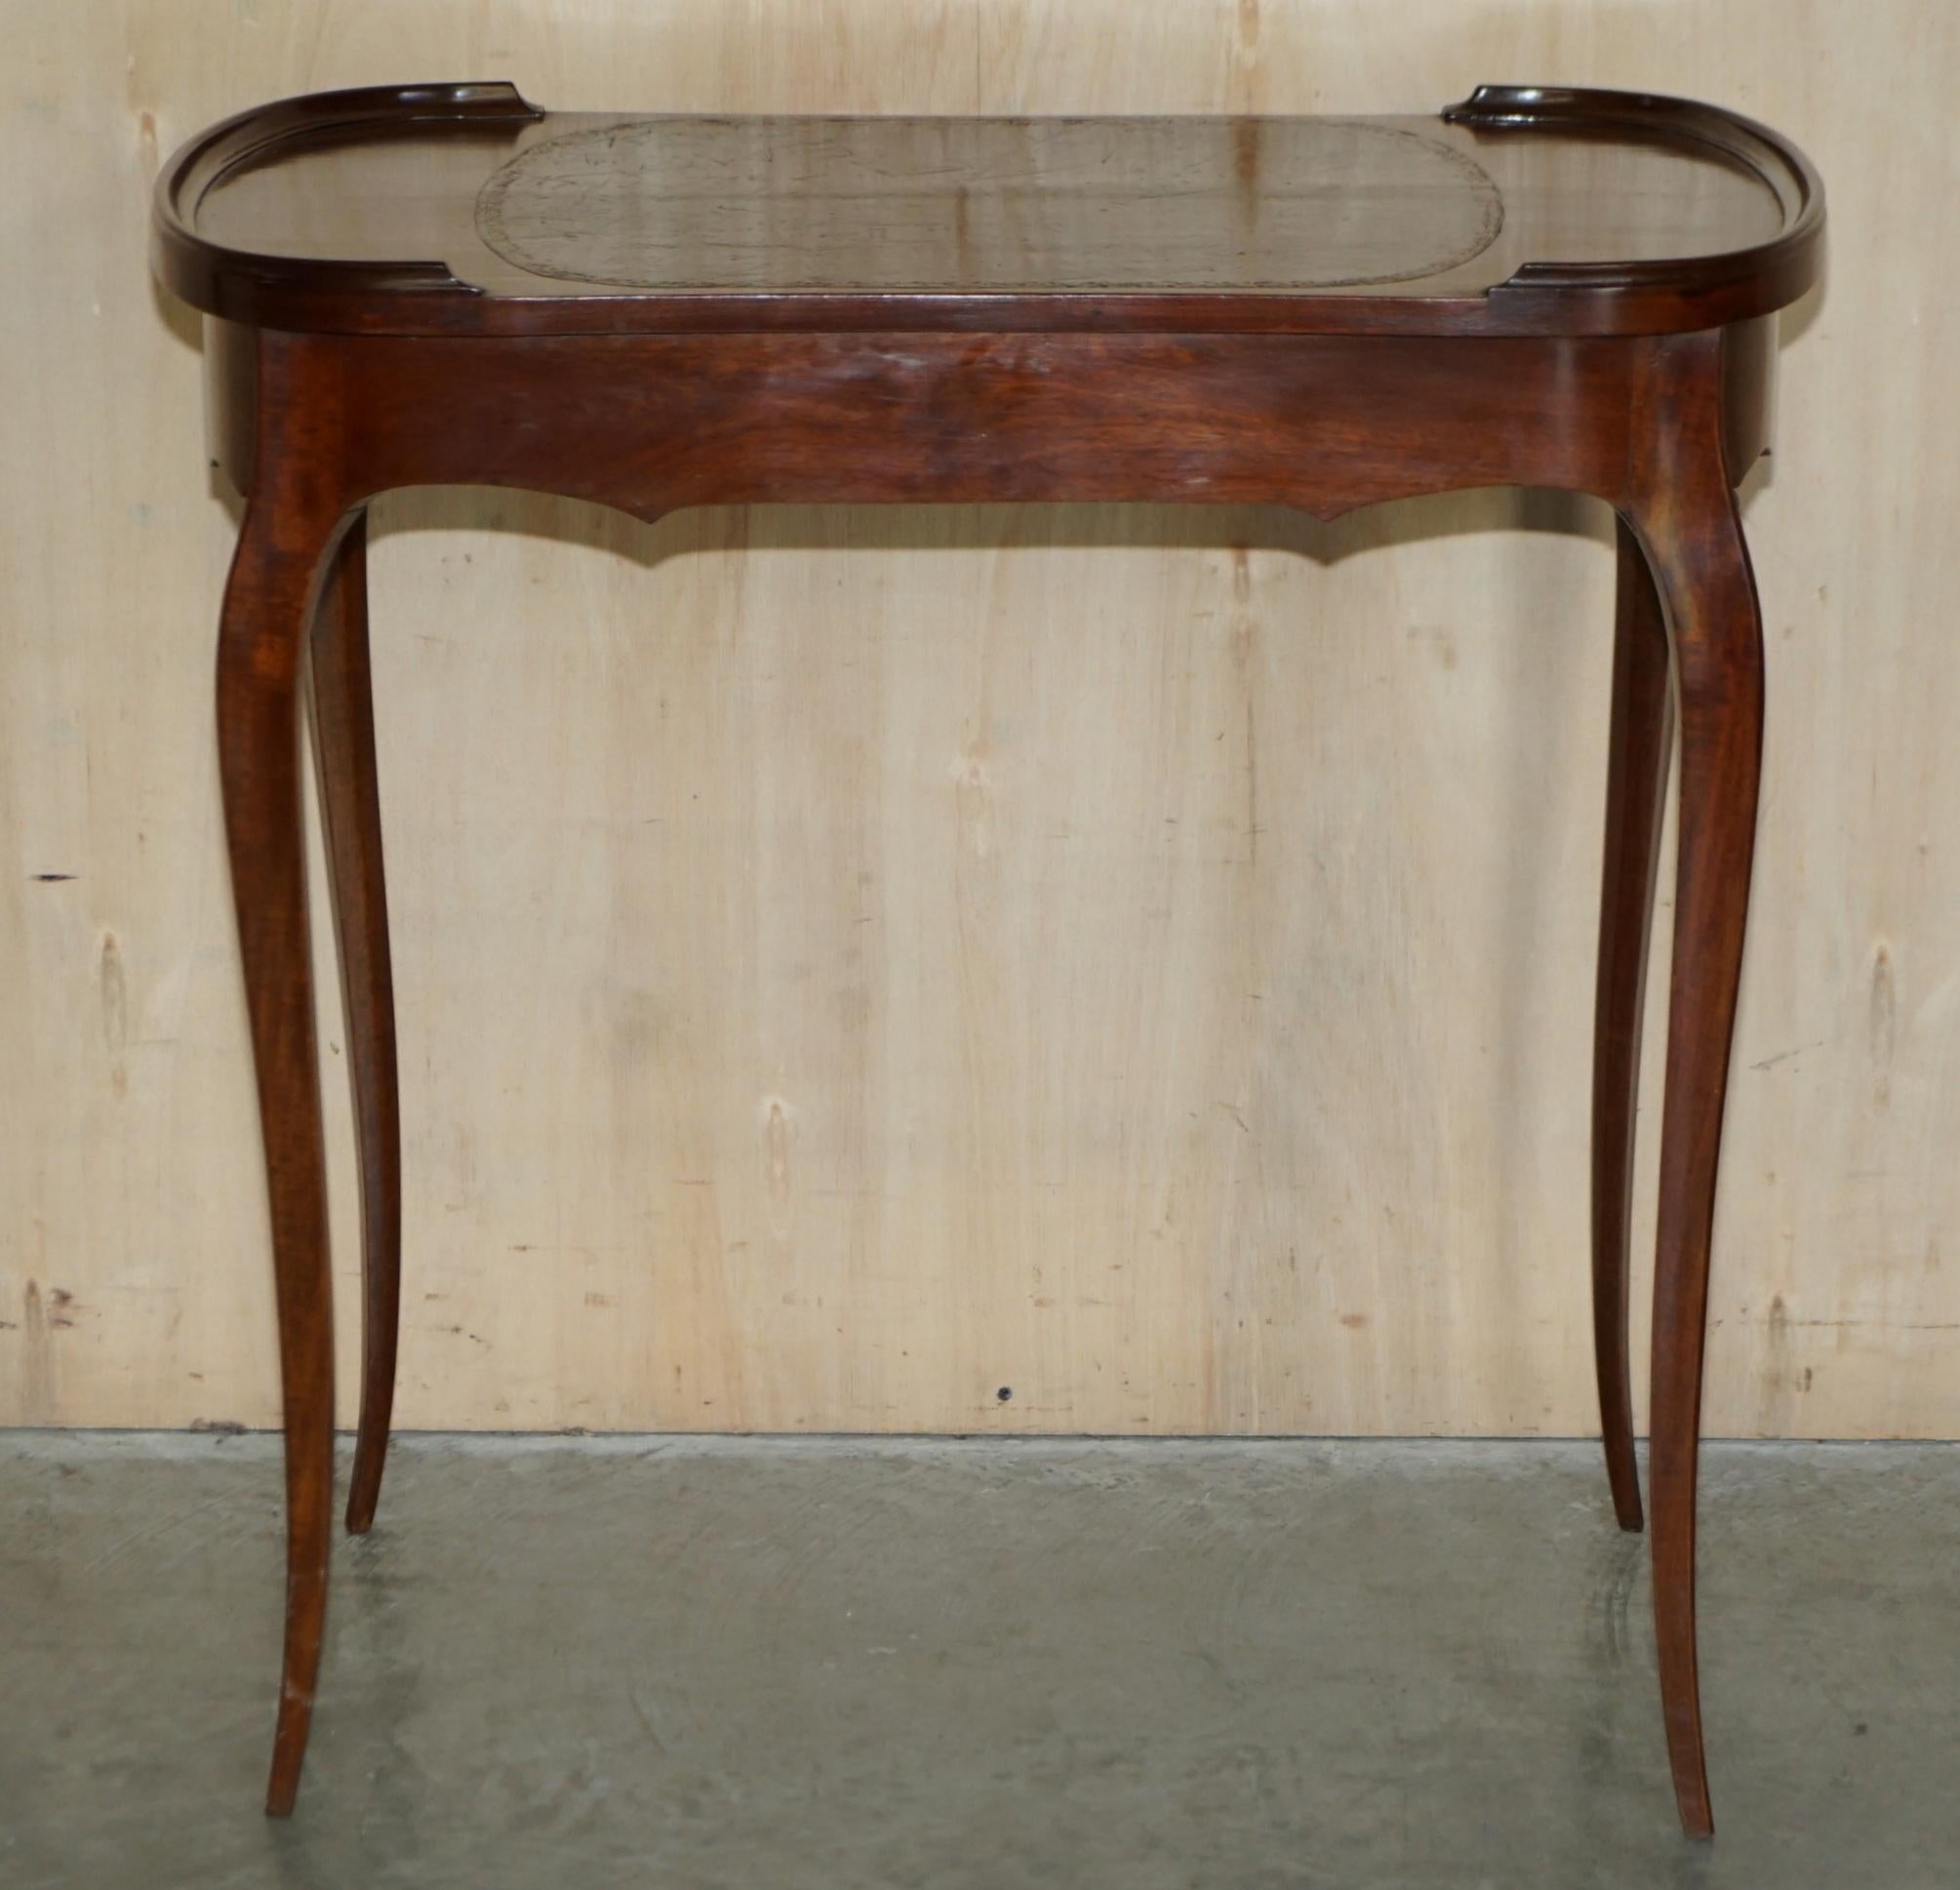 Restored Antique Kidney Shaped Occasional Table with Drawers Brown Leather Top For Sale 10